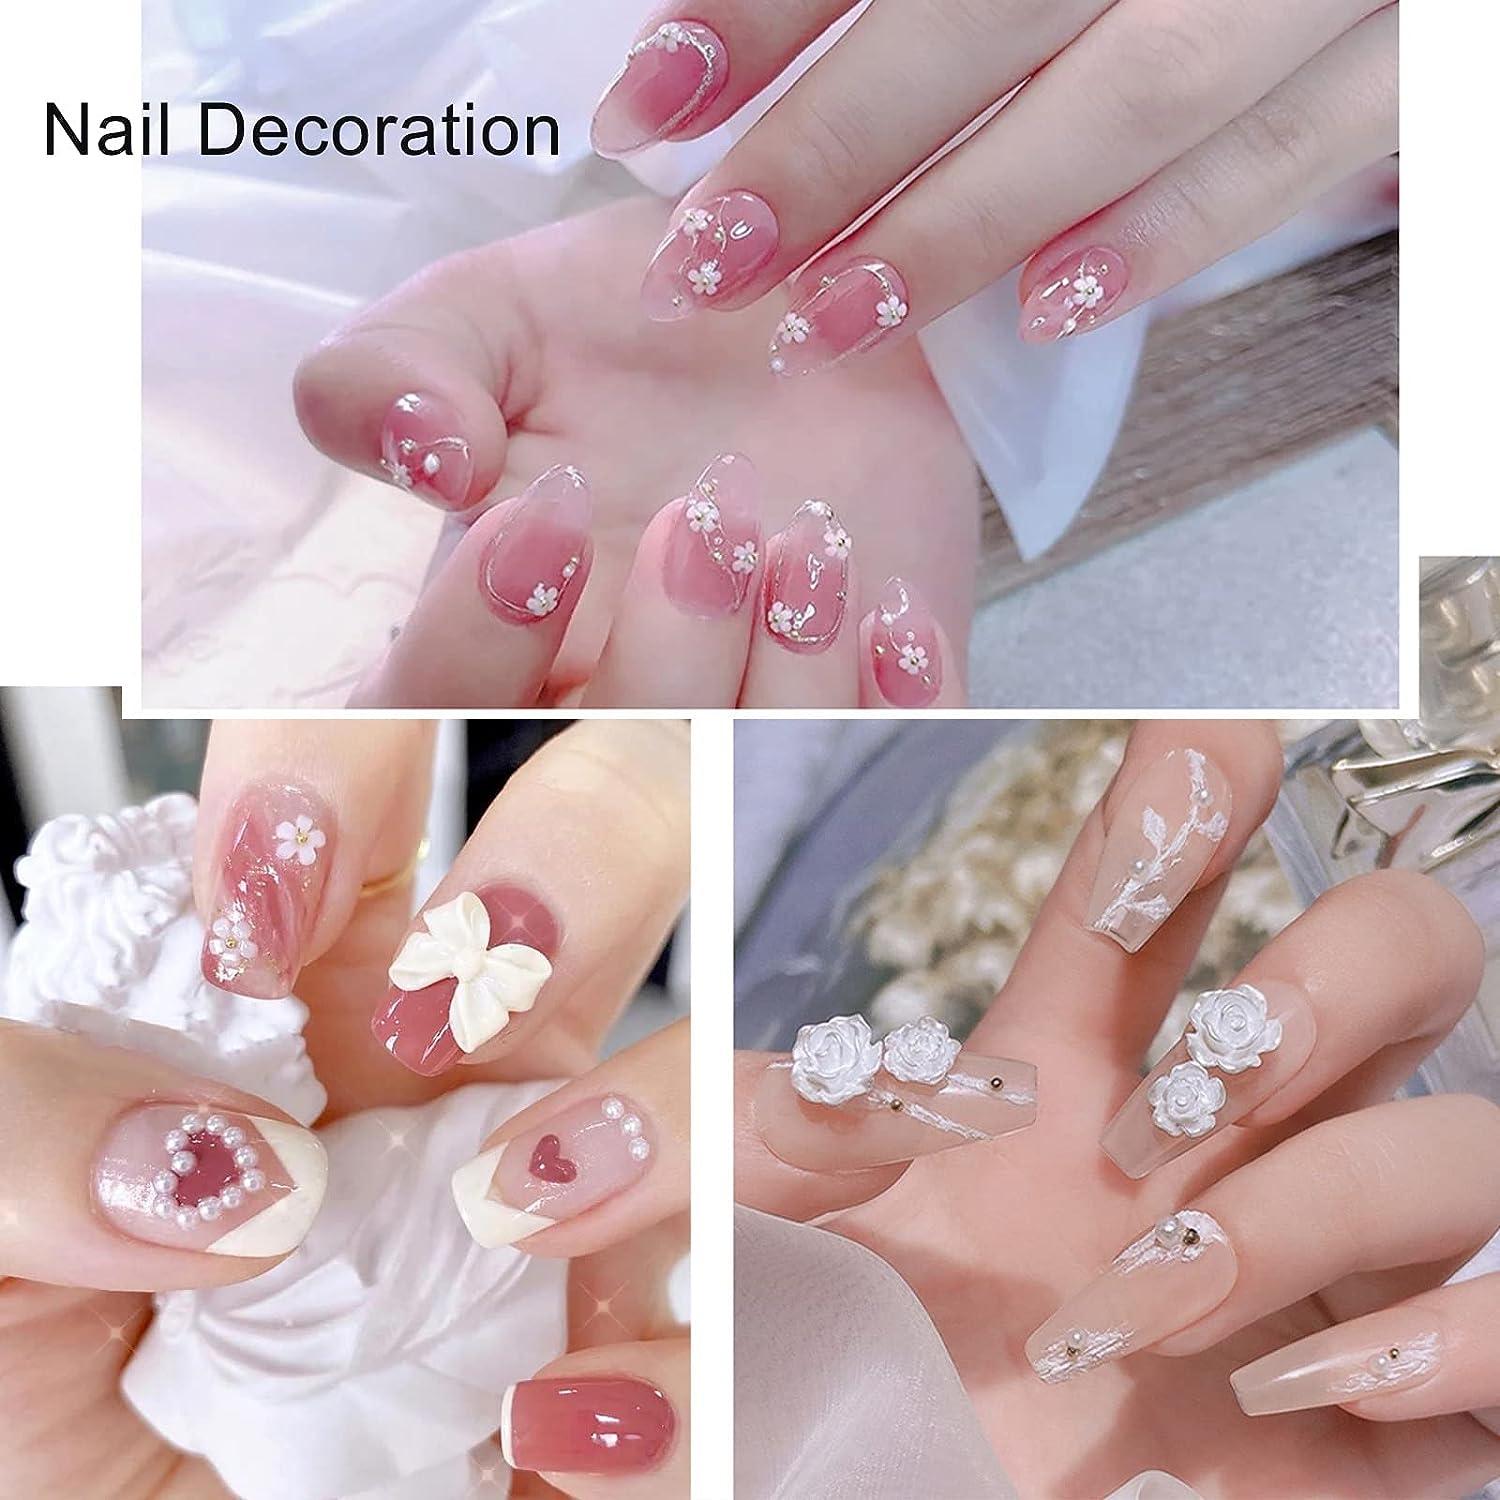 3d nail art charms, 3d nail art charms Suppliers and Manufacturers at